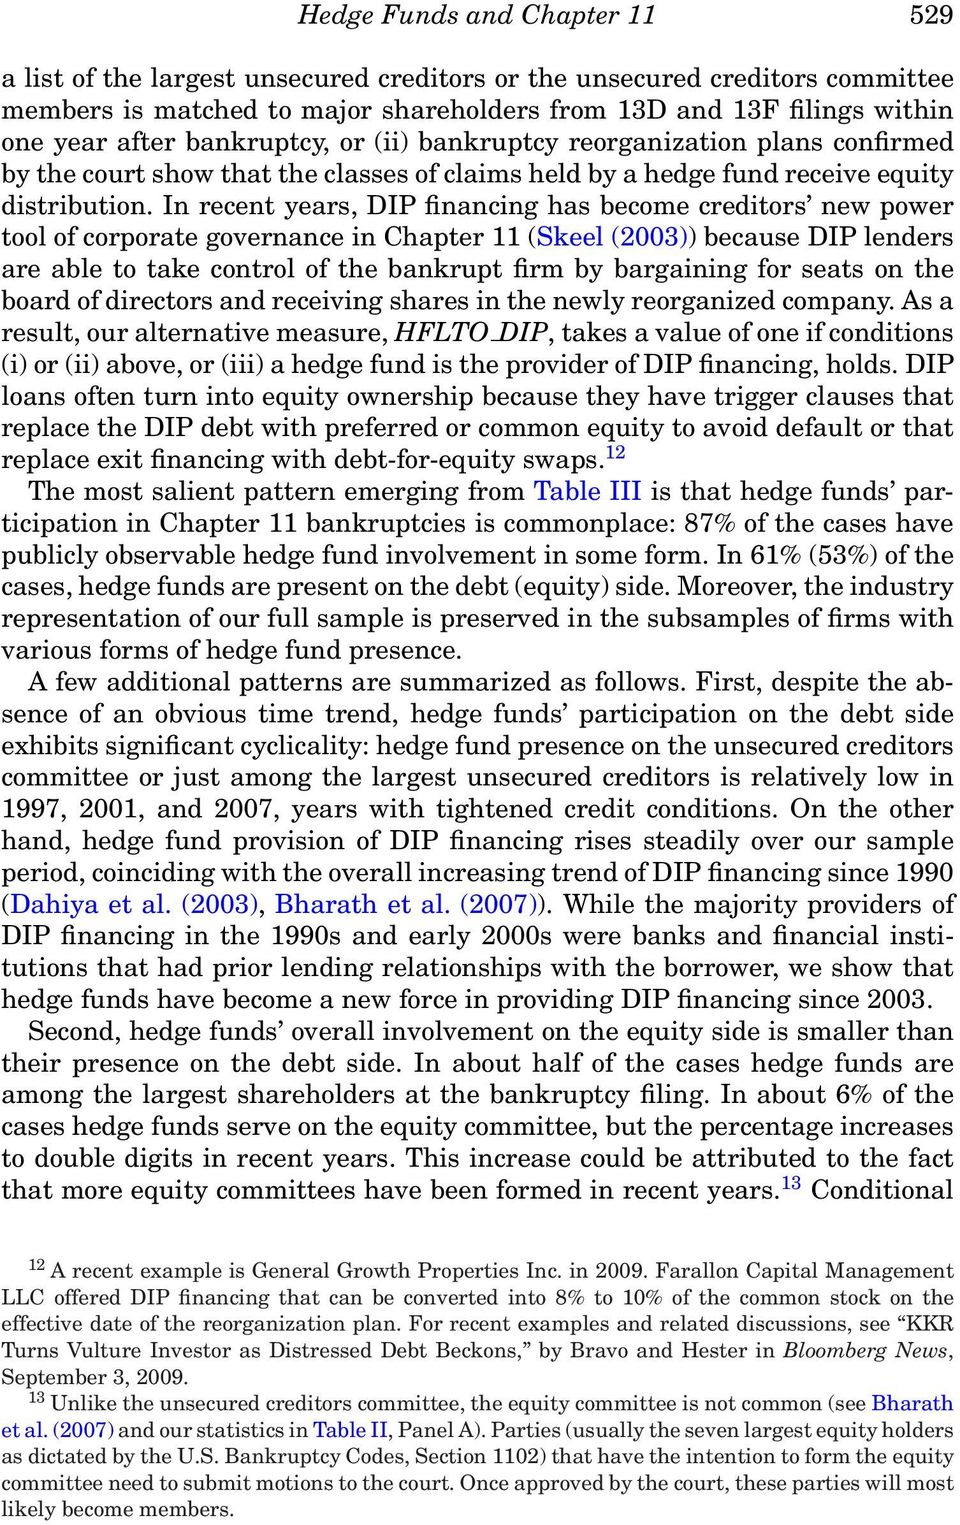 In recent years, DIP financing has become creditors new power tool of corporate governance in Chapter 11 (Skeel (2003)) because DIP lenders are able to take control of the bankrupt firm by bargaining